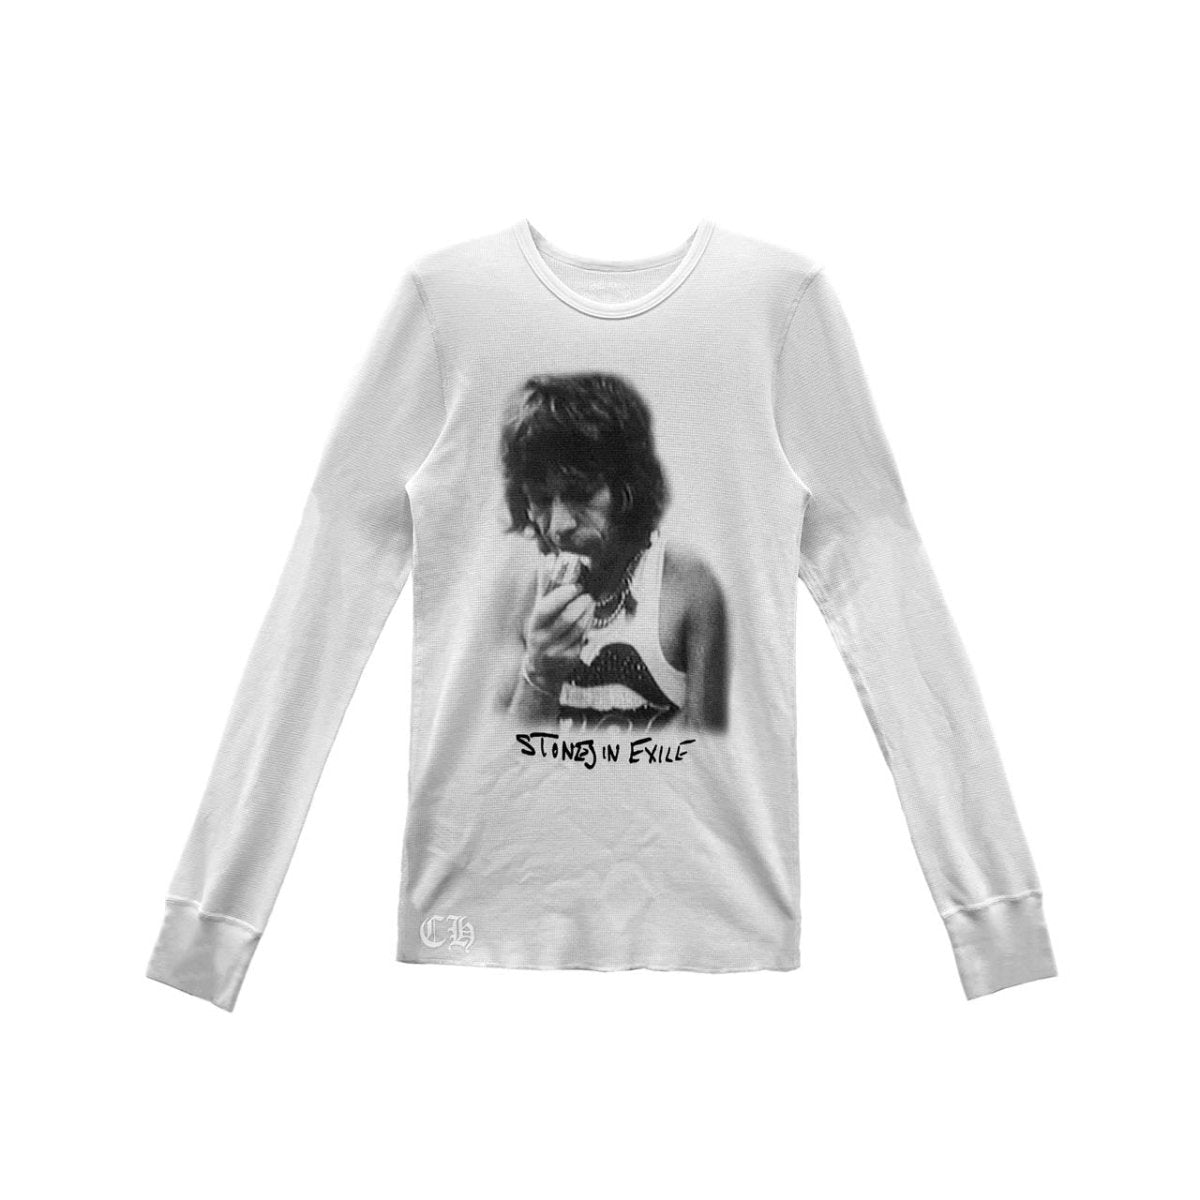 Chrome Hearts Rolling Stones Exclusive Waffle Long Sleeve T - SHENGLI ROAD MARKET